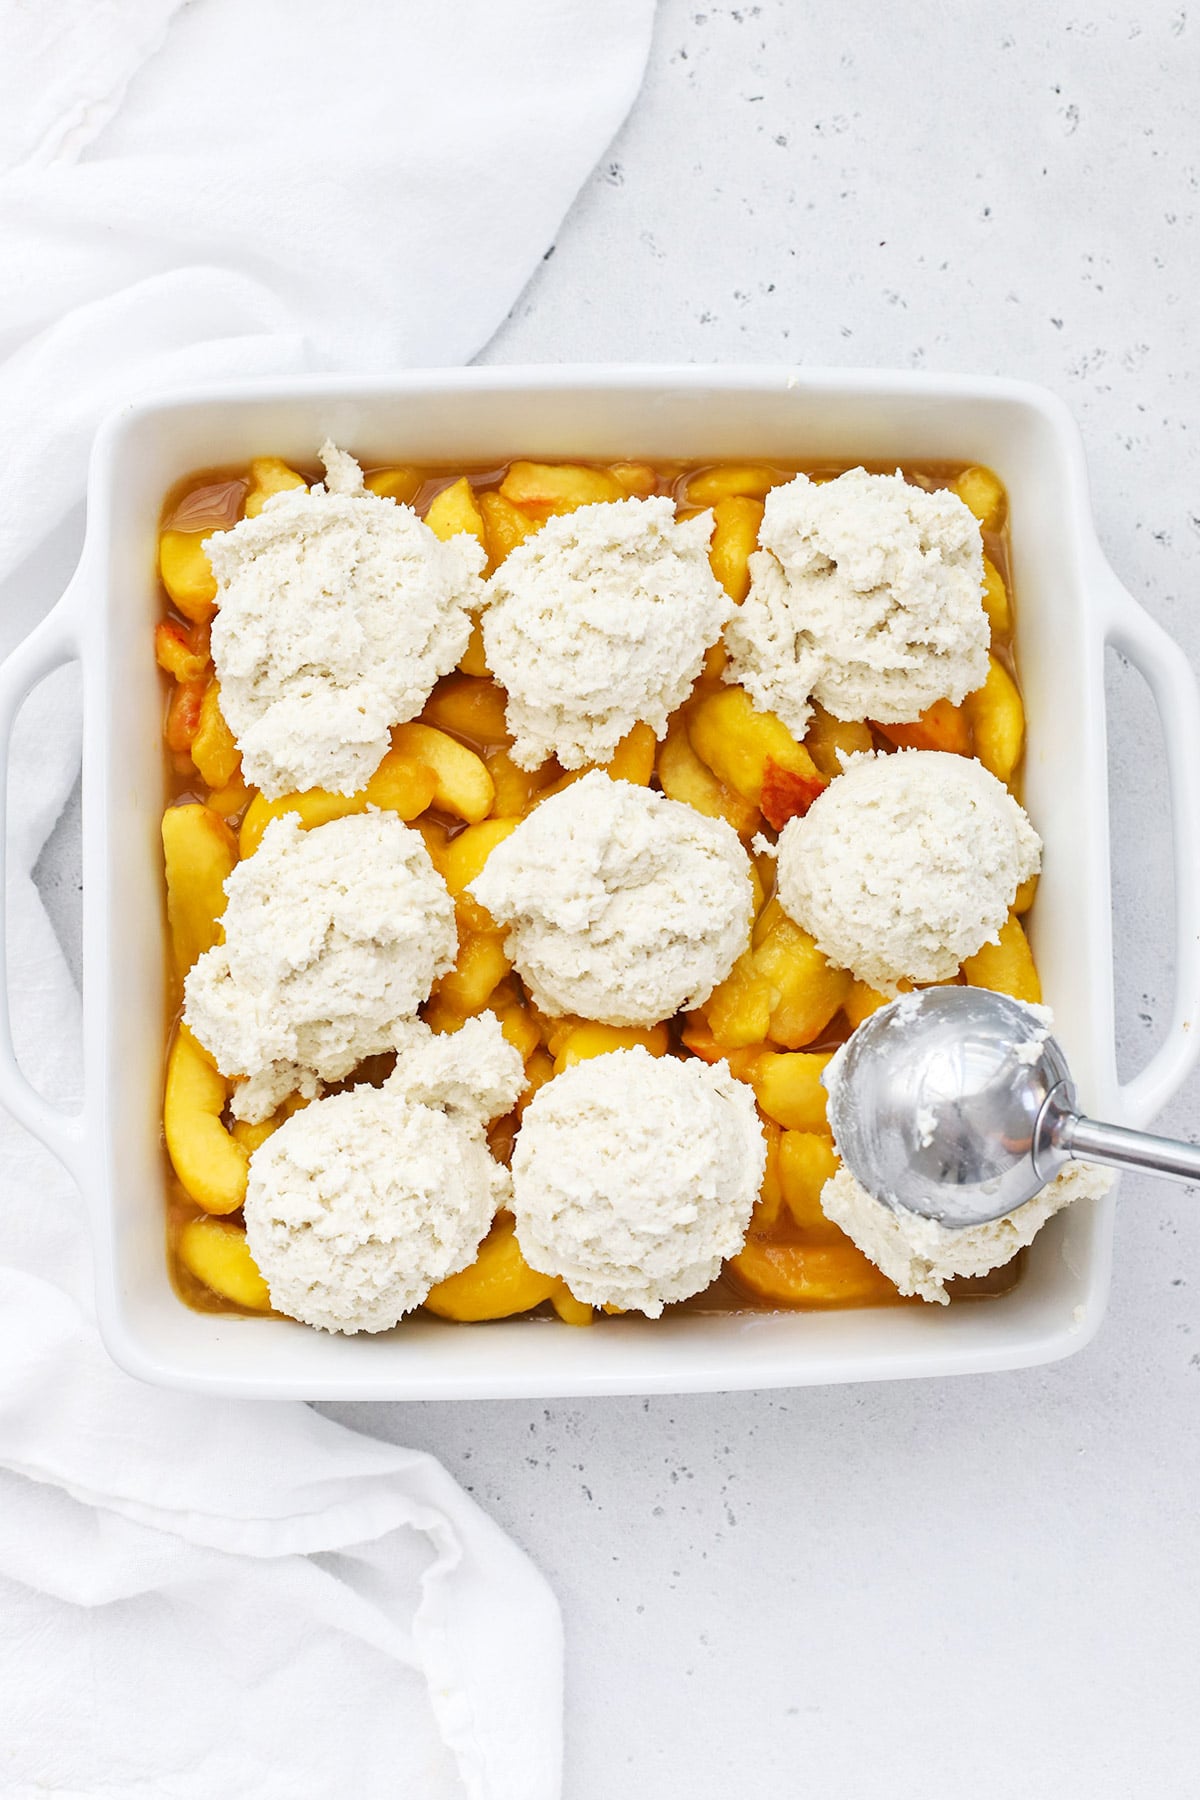 Scooping sweet gluten-free biscuit dough over the peach filling